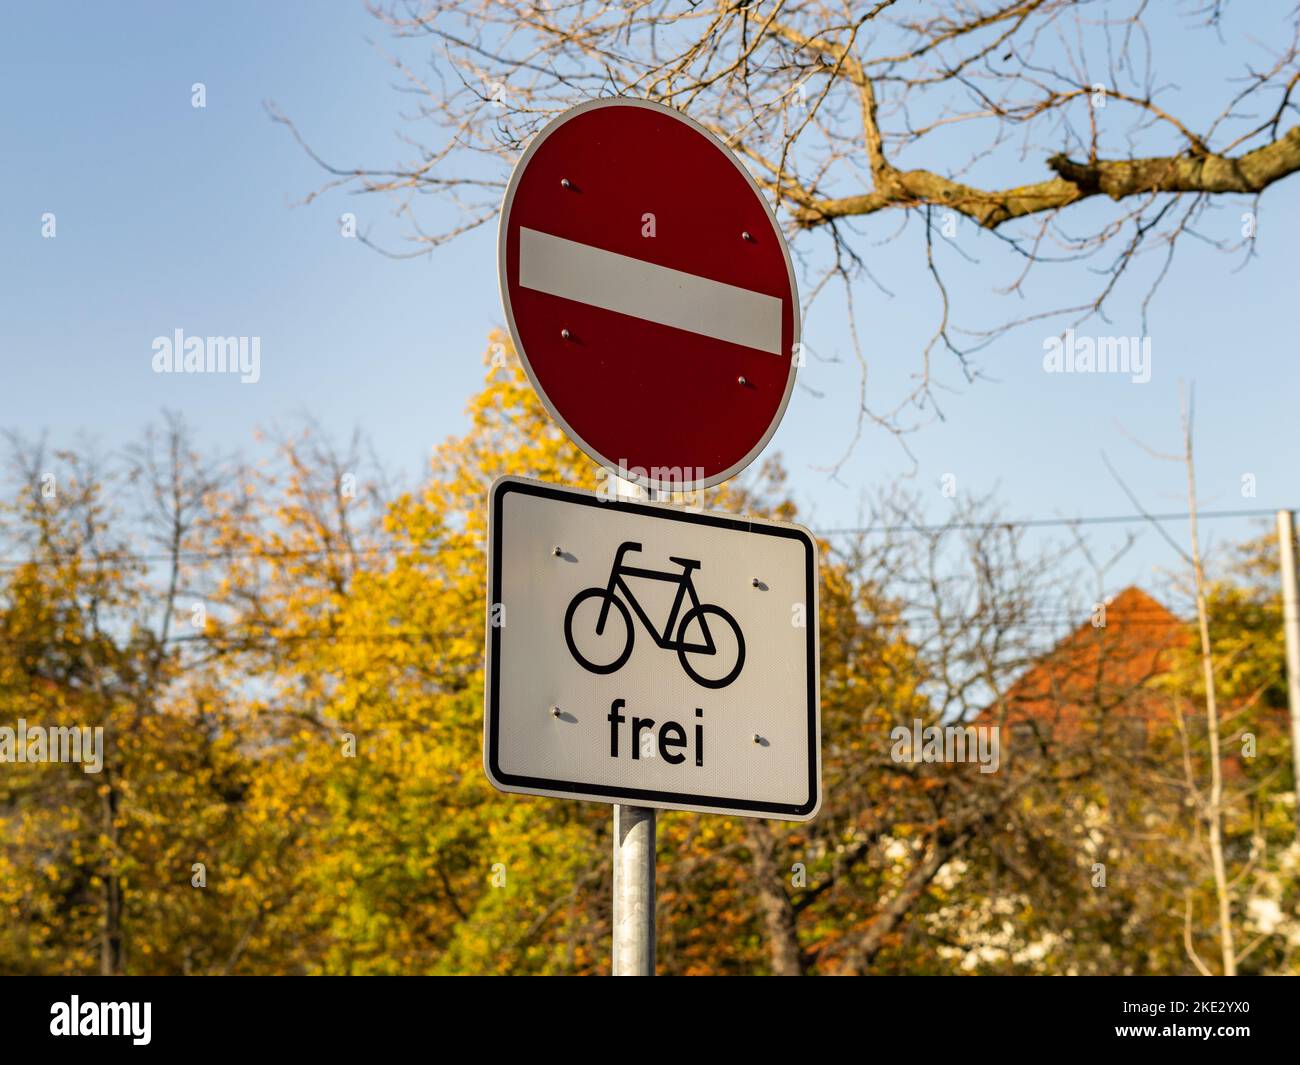 No entry traffic sign with the addition that bicycles are allowed. Road sign for car divers at a one-way street in Germany. Regulations for traffic. Stock Photo